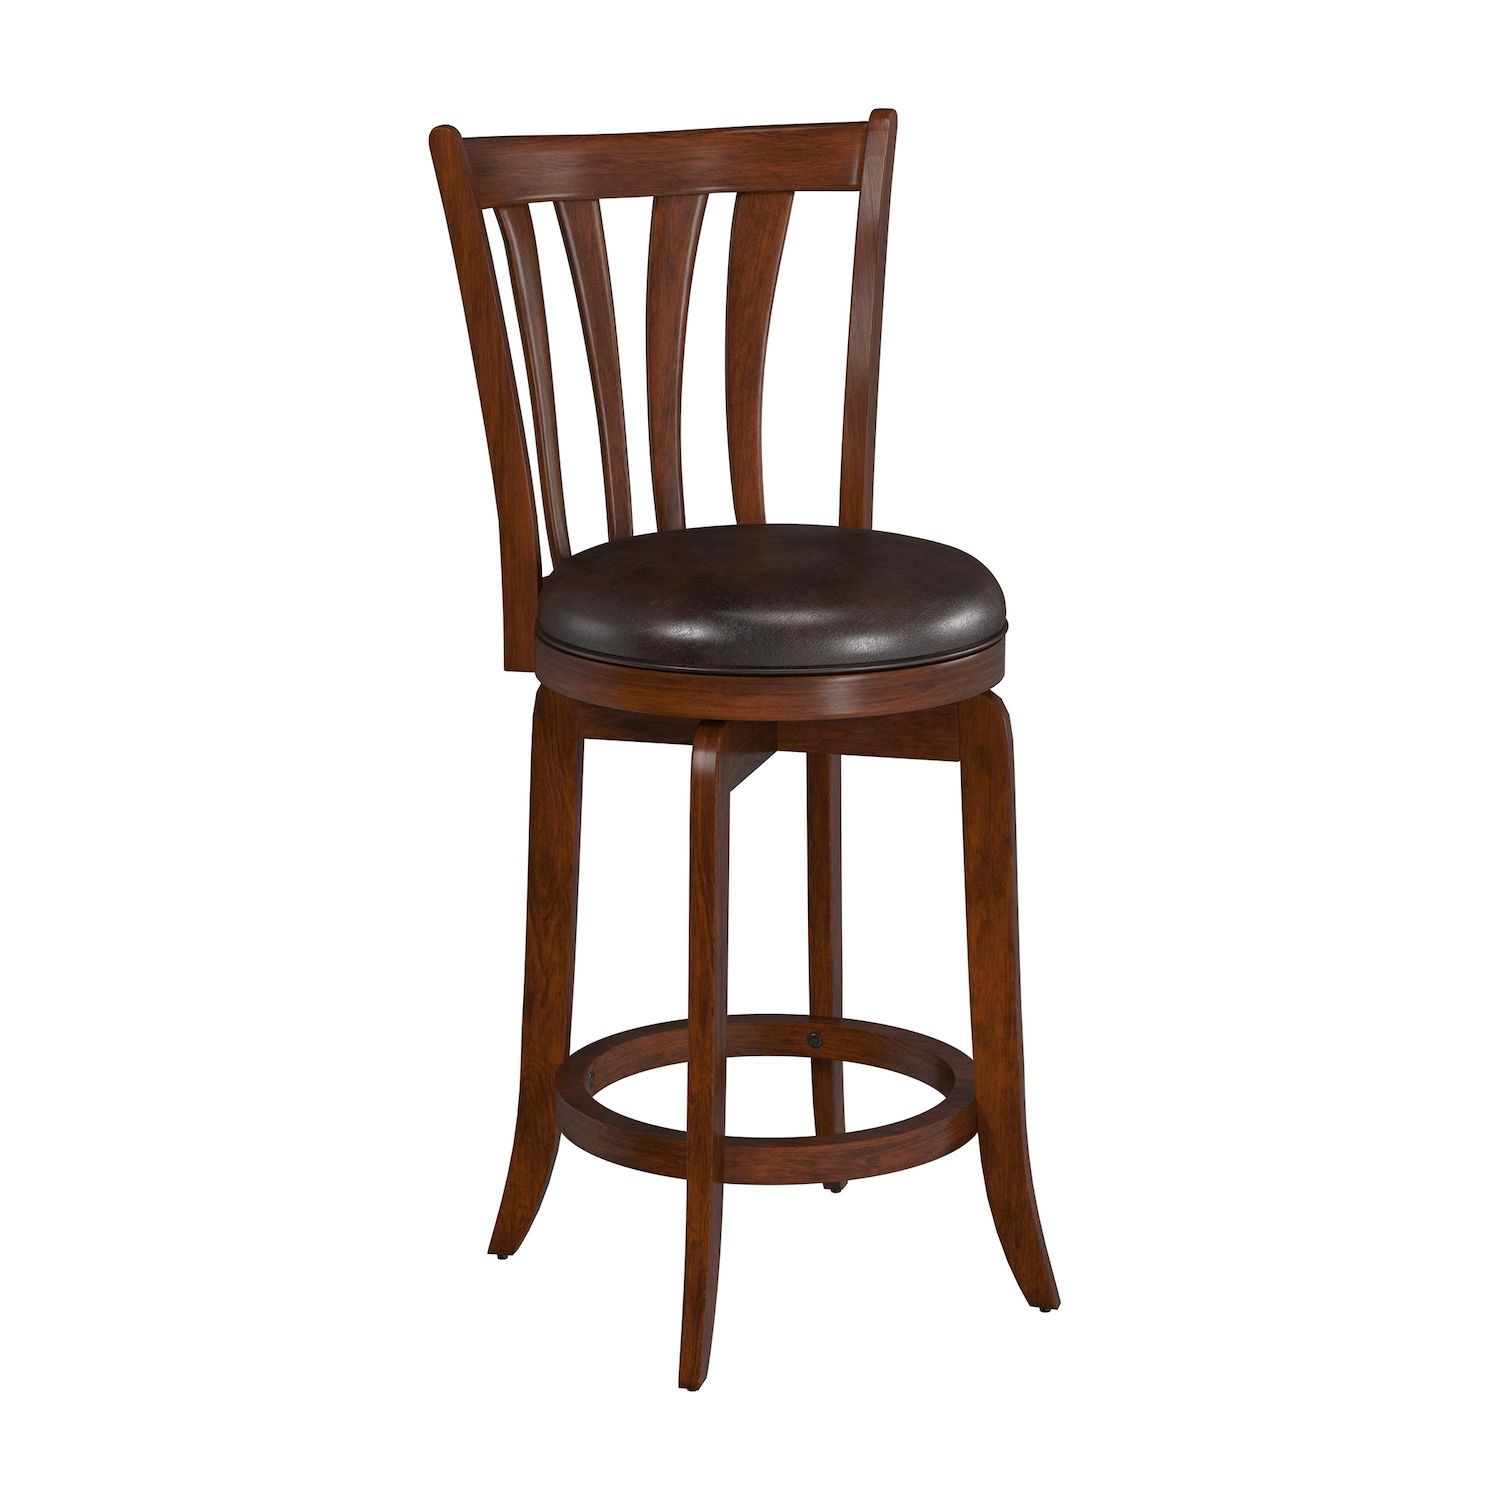 Image for Hillsdale Furniture Savana Swivel Counter Stool at Kohl's.